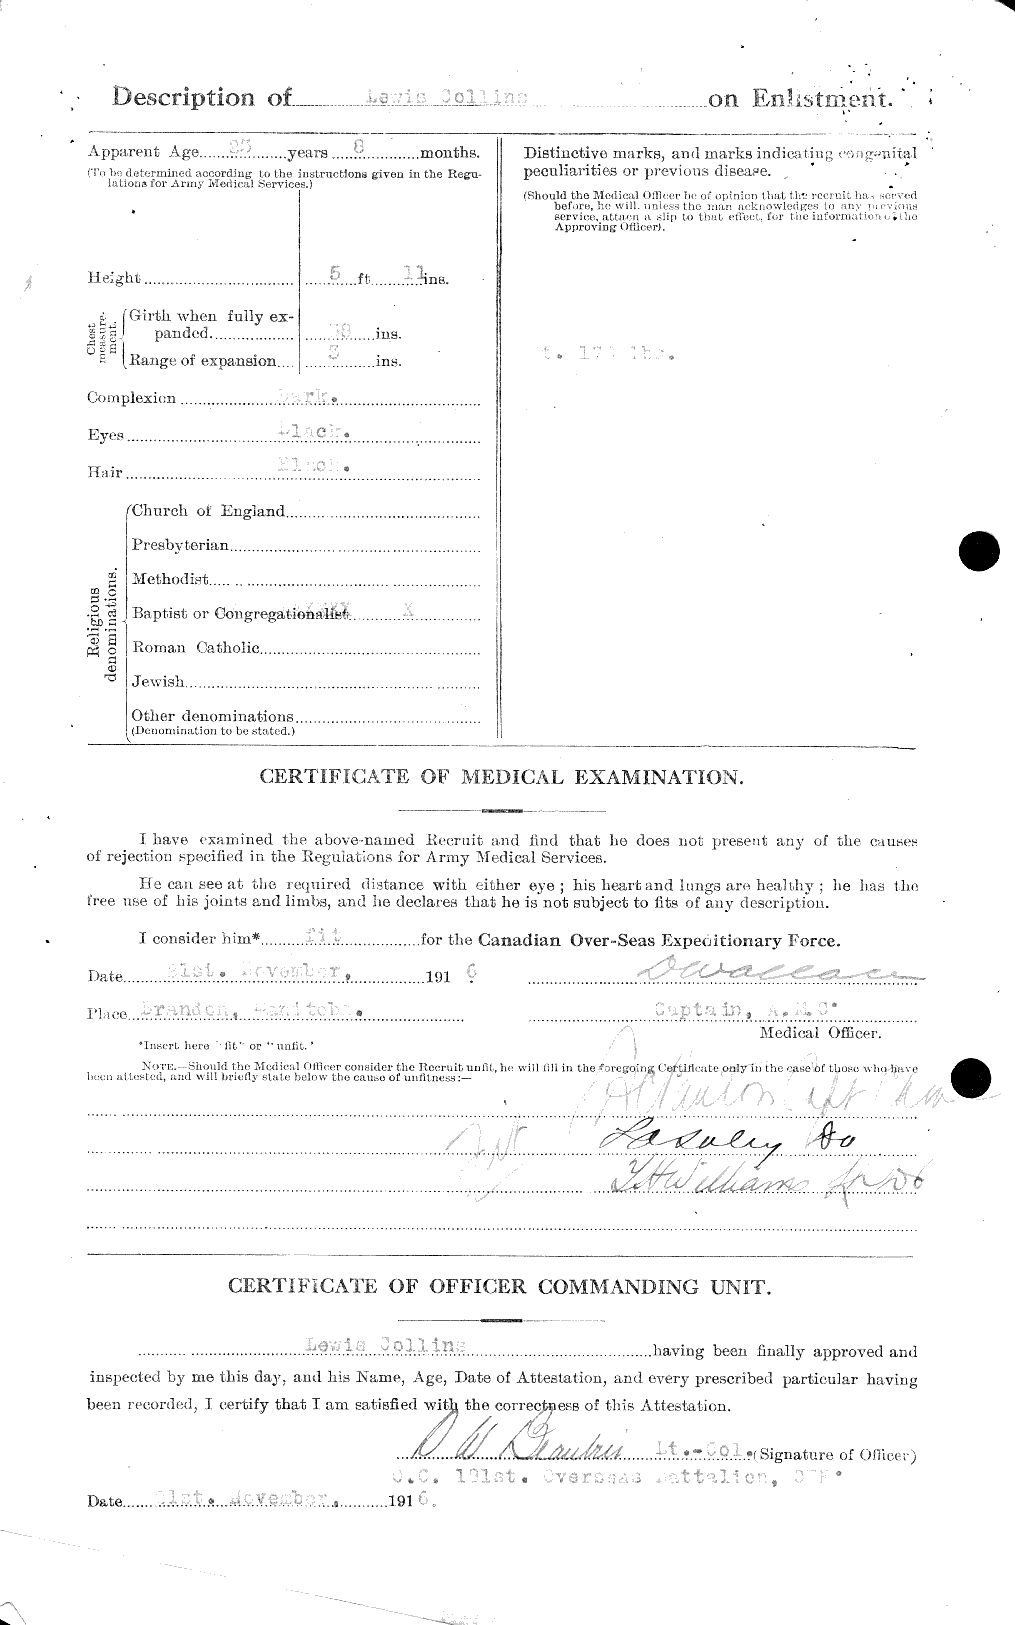 Personnel Records of the First World War - CEF 034448b